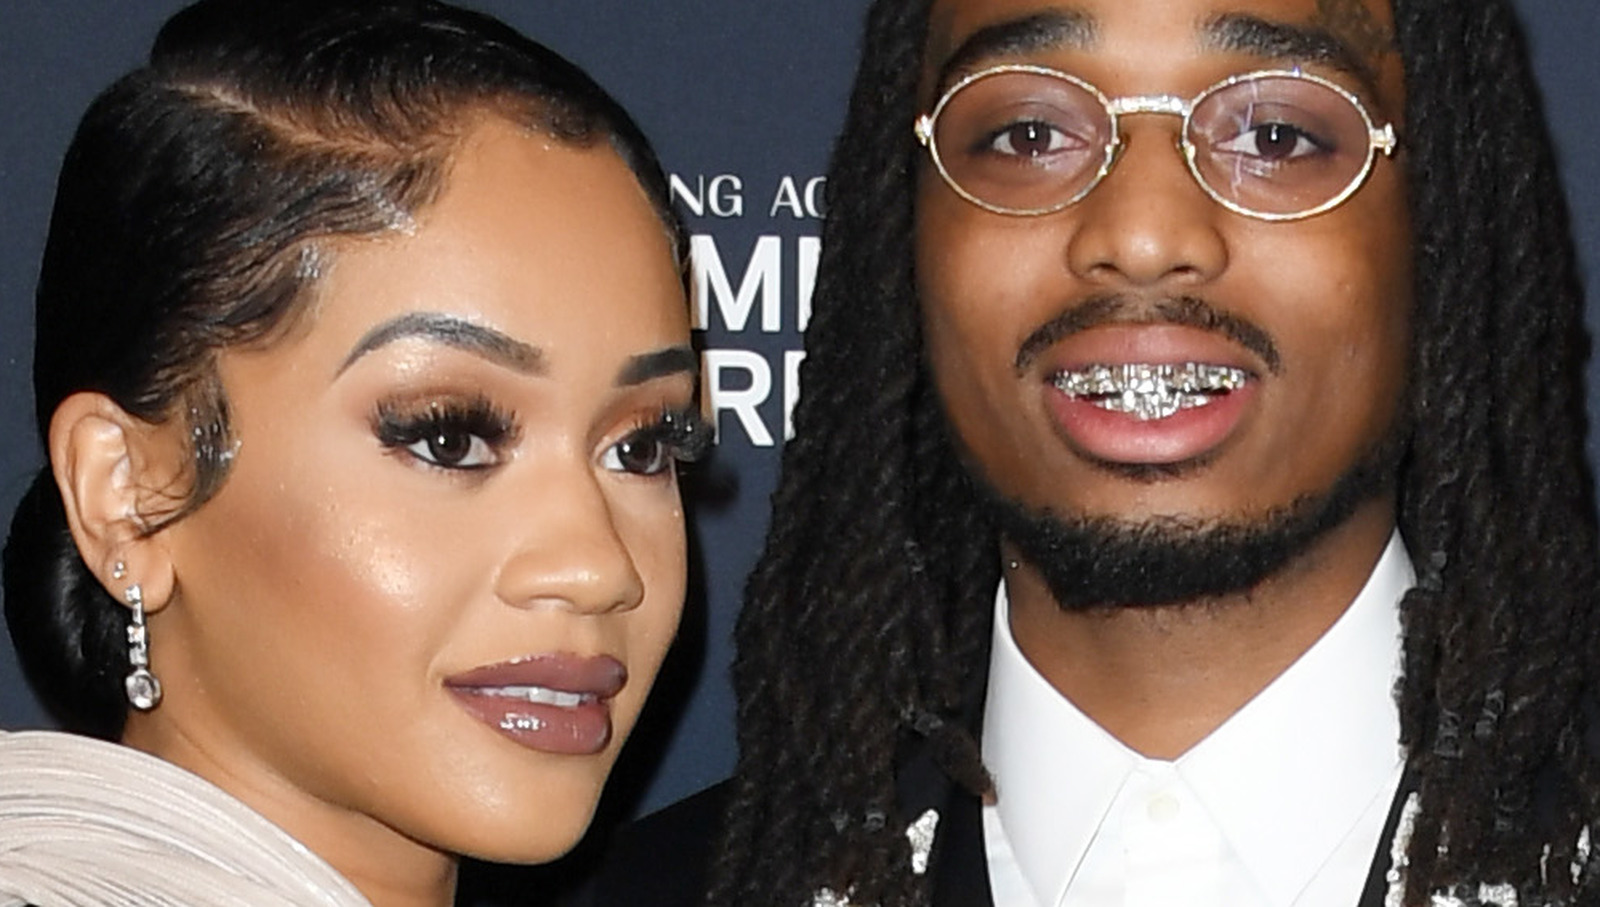 Saweetie Makes An Eyebrow-Raising Claim About Why She's Newly Single